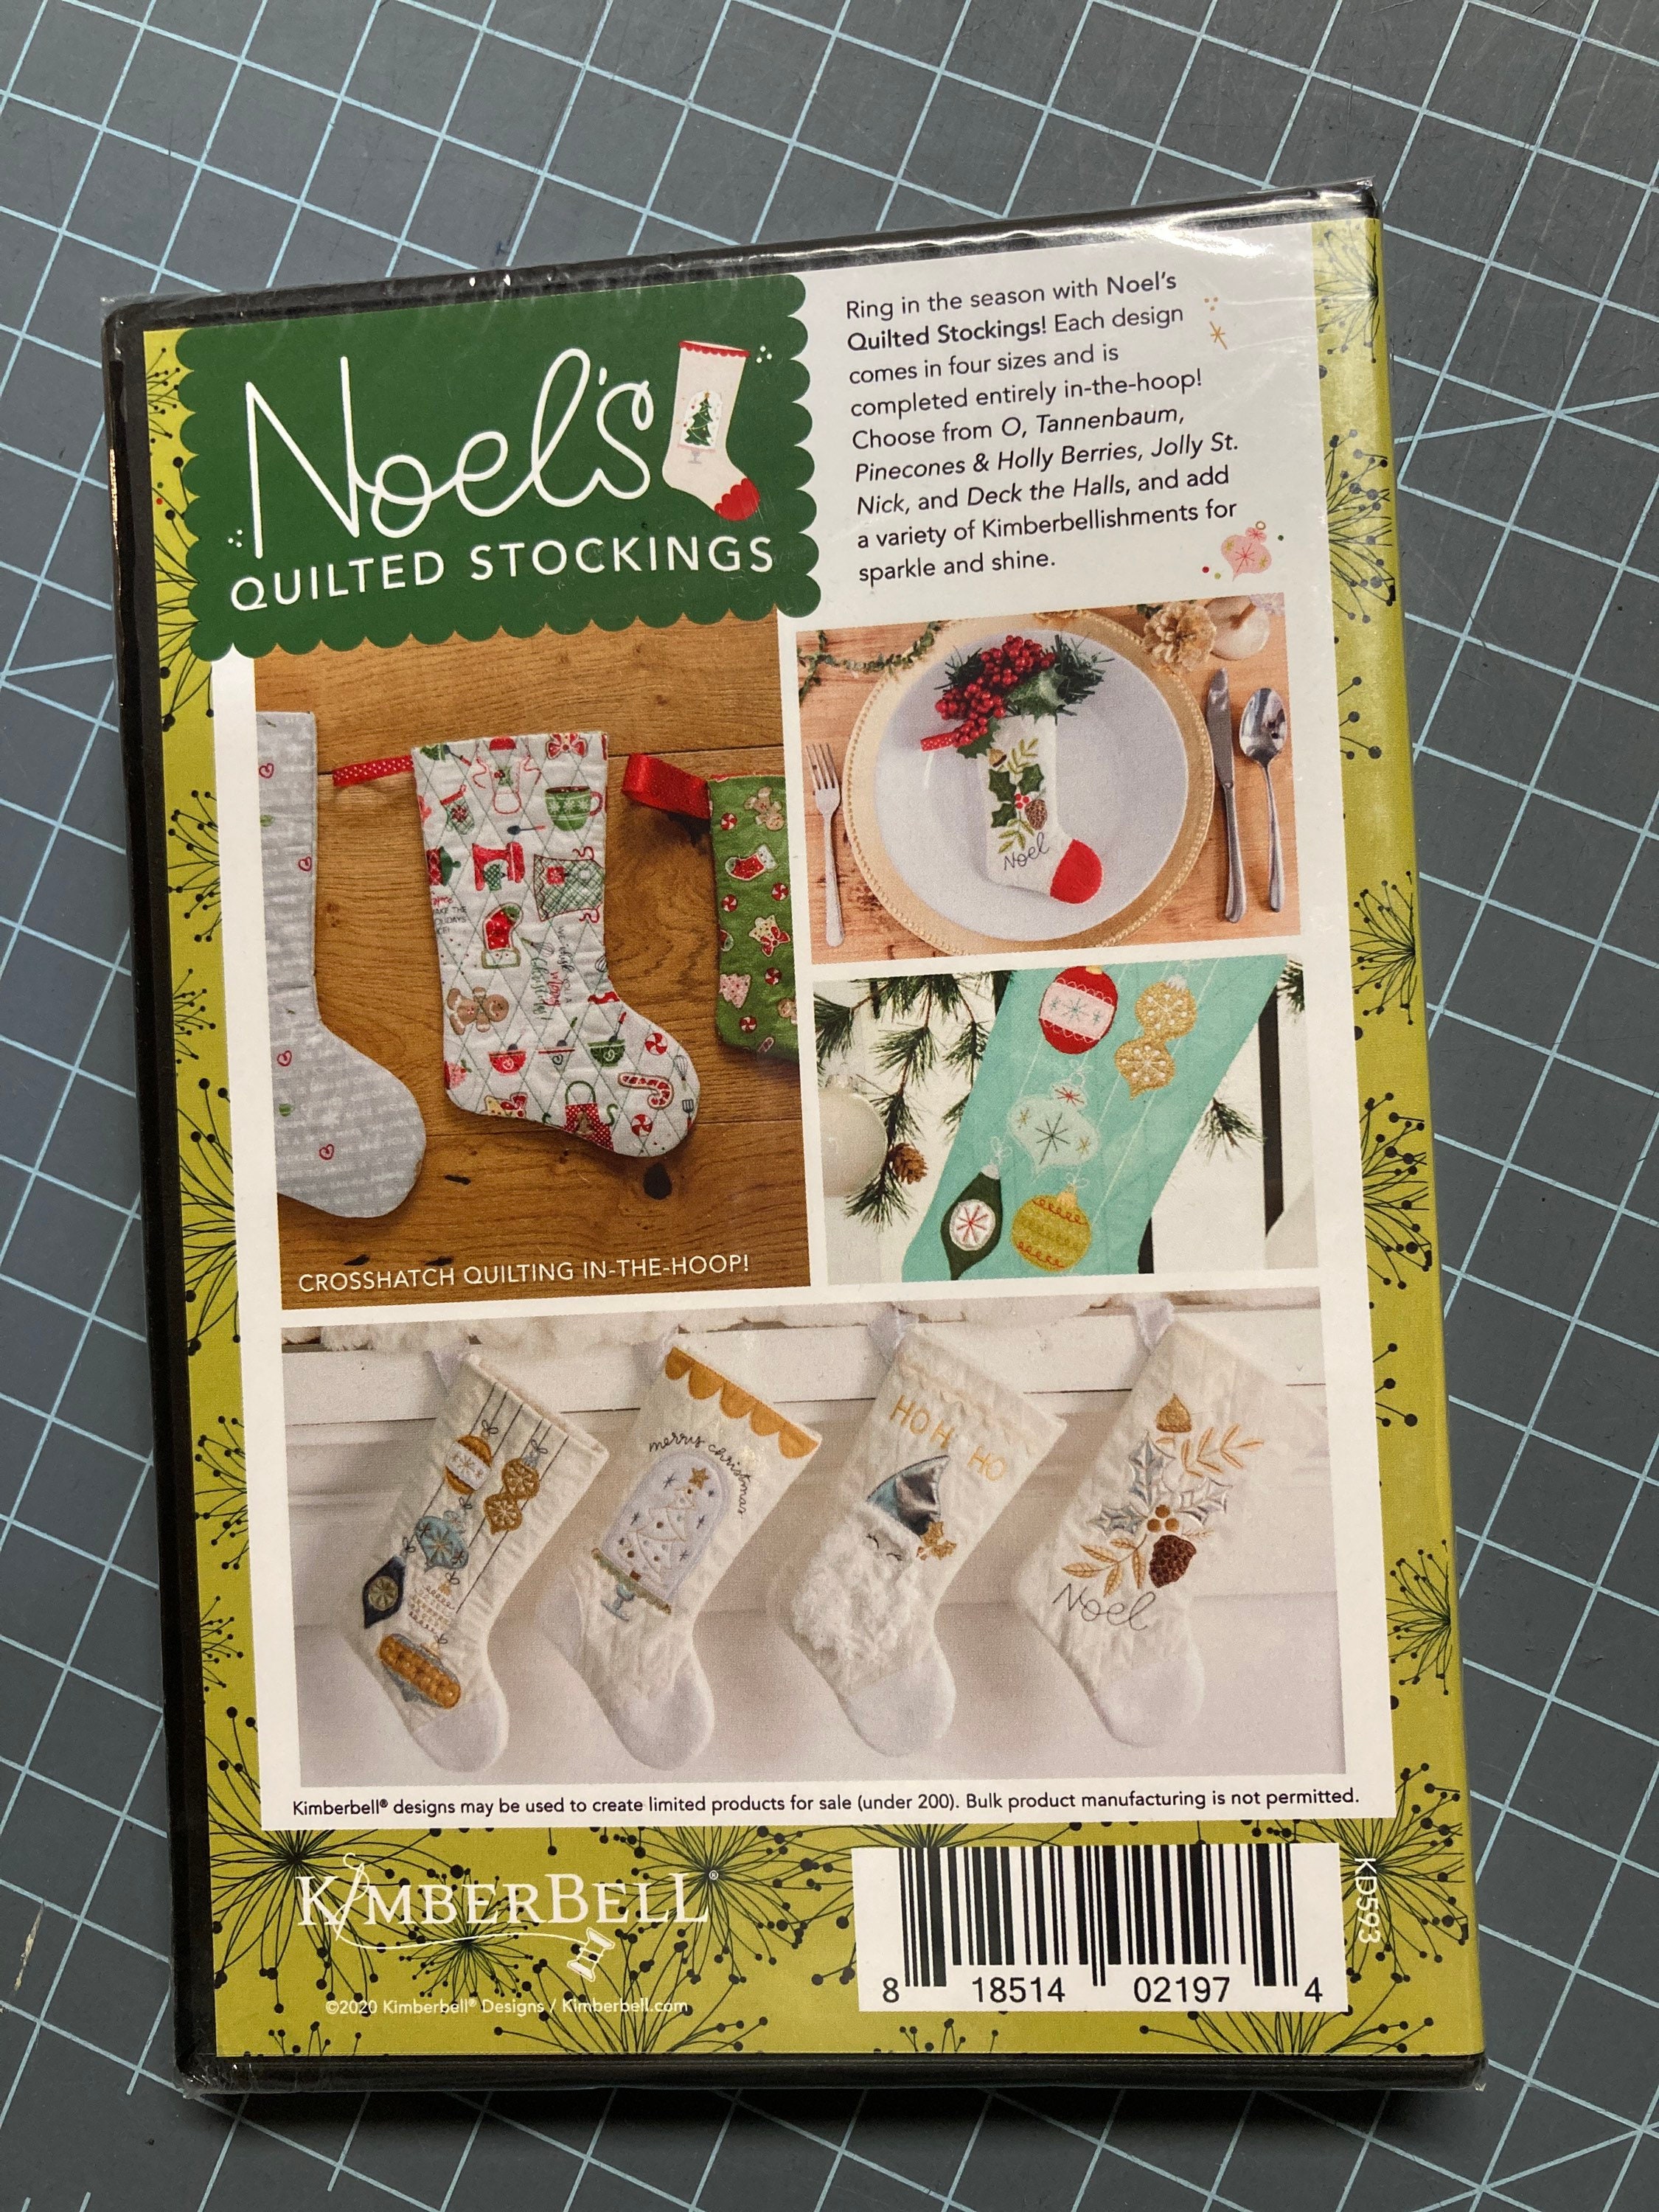 Kimberbell Noel's Stocking Embroidery Designs – Quiltandsew.com